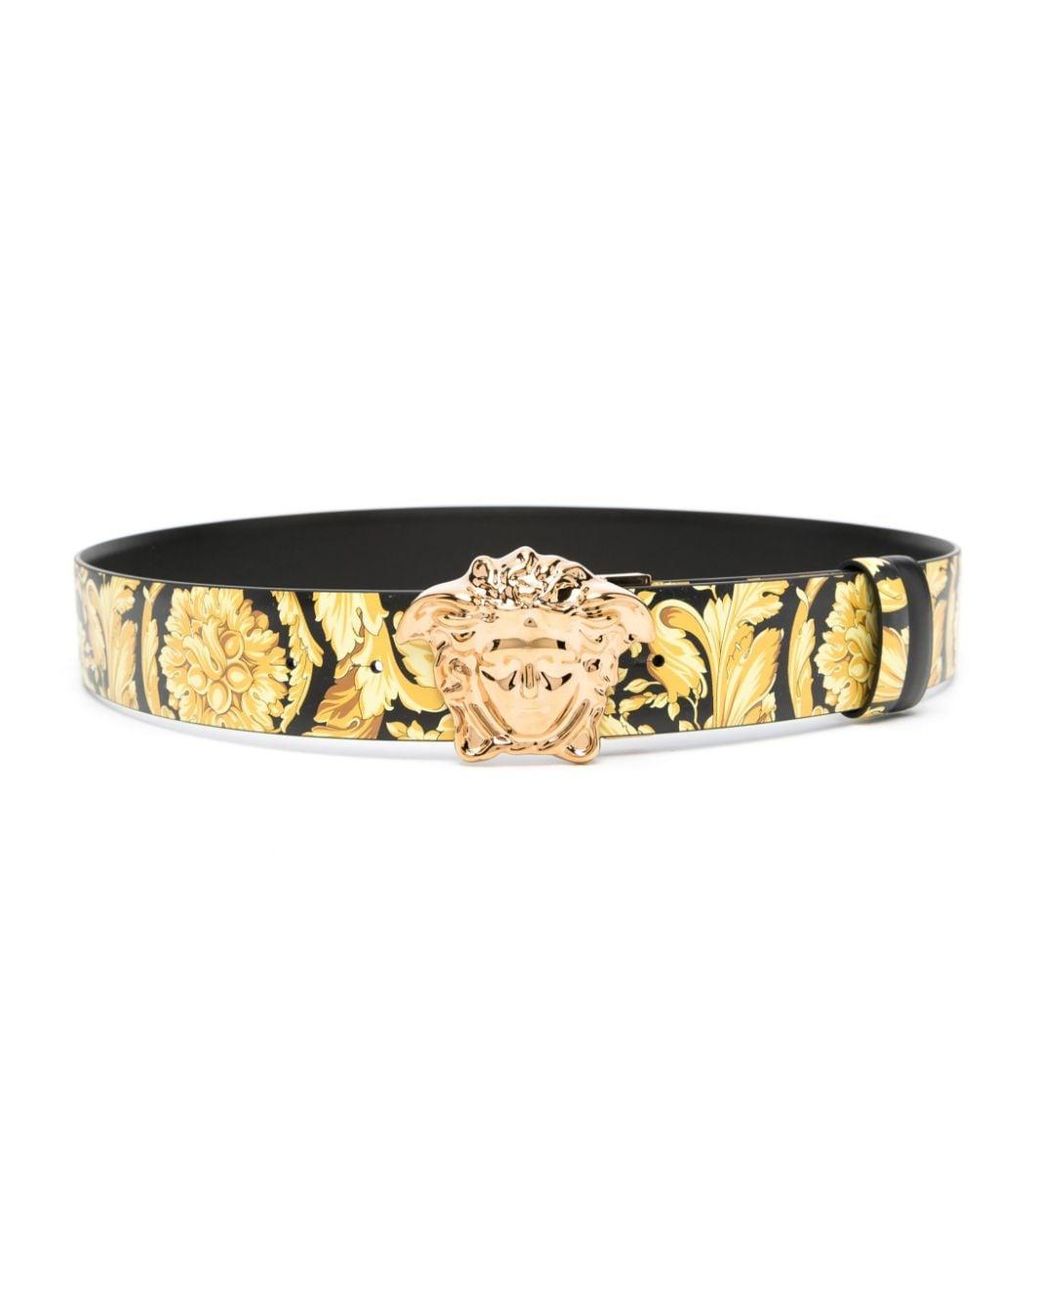 Versace Palazzo Belt with Medusa Buckle Gold-Tone Black